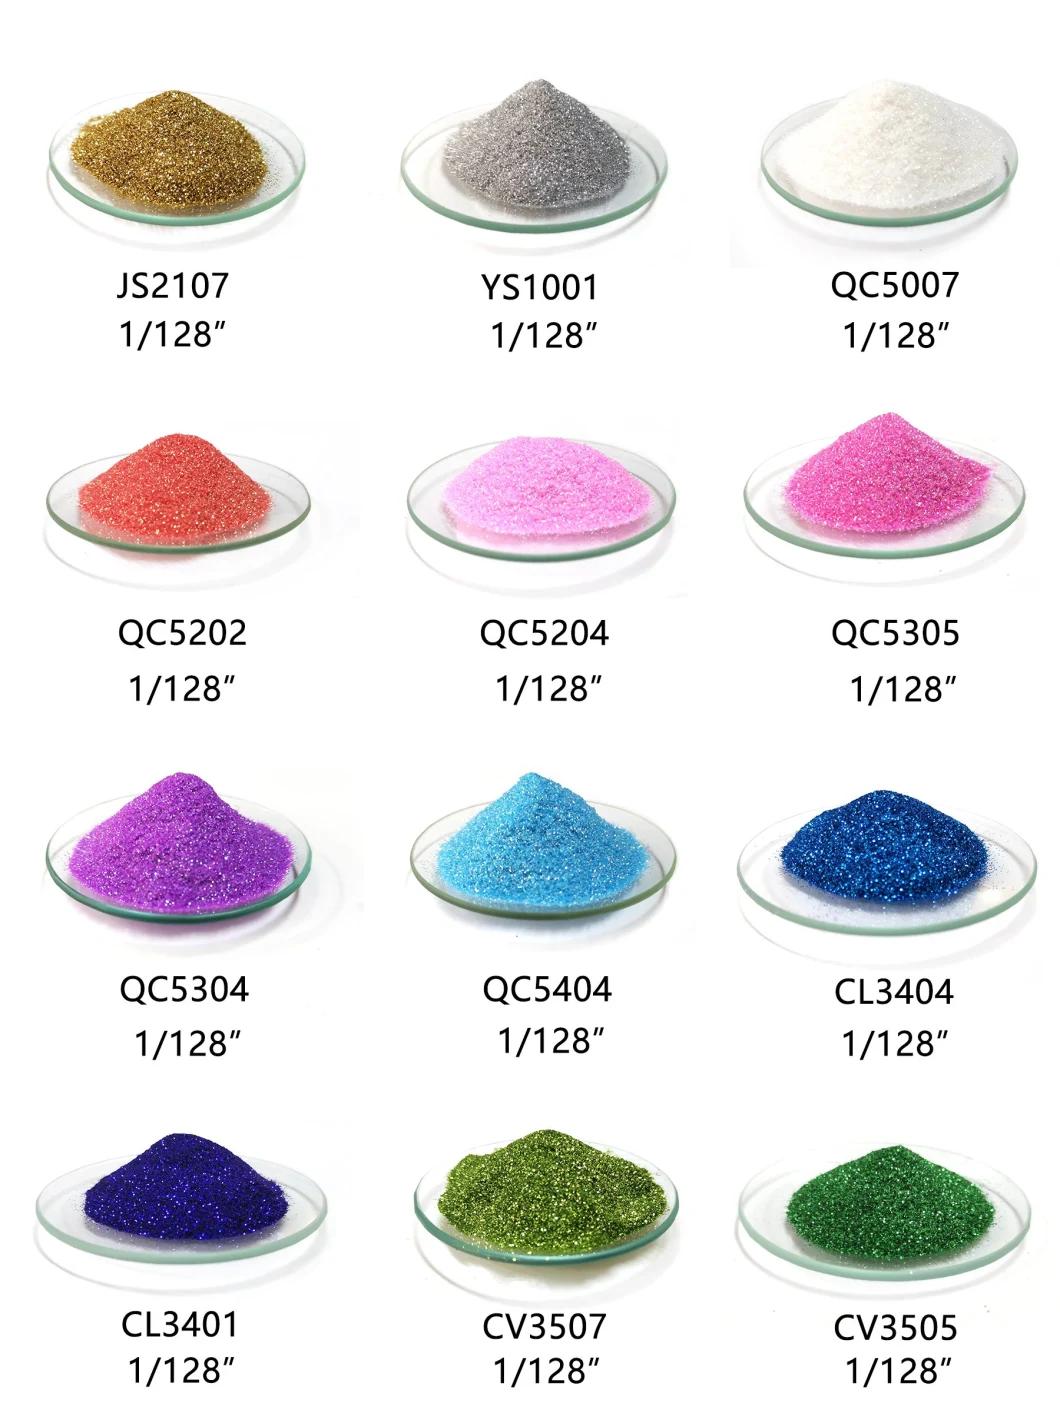 New Type Colored Glitter Powder for Crafts